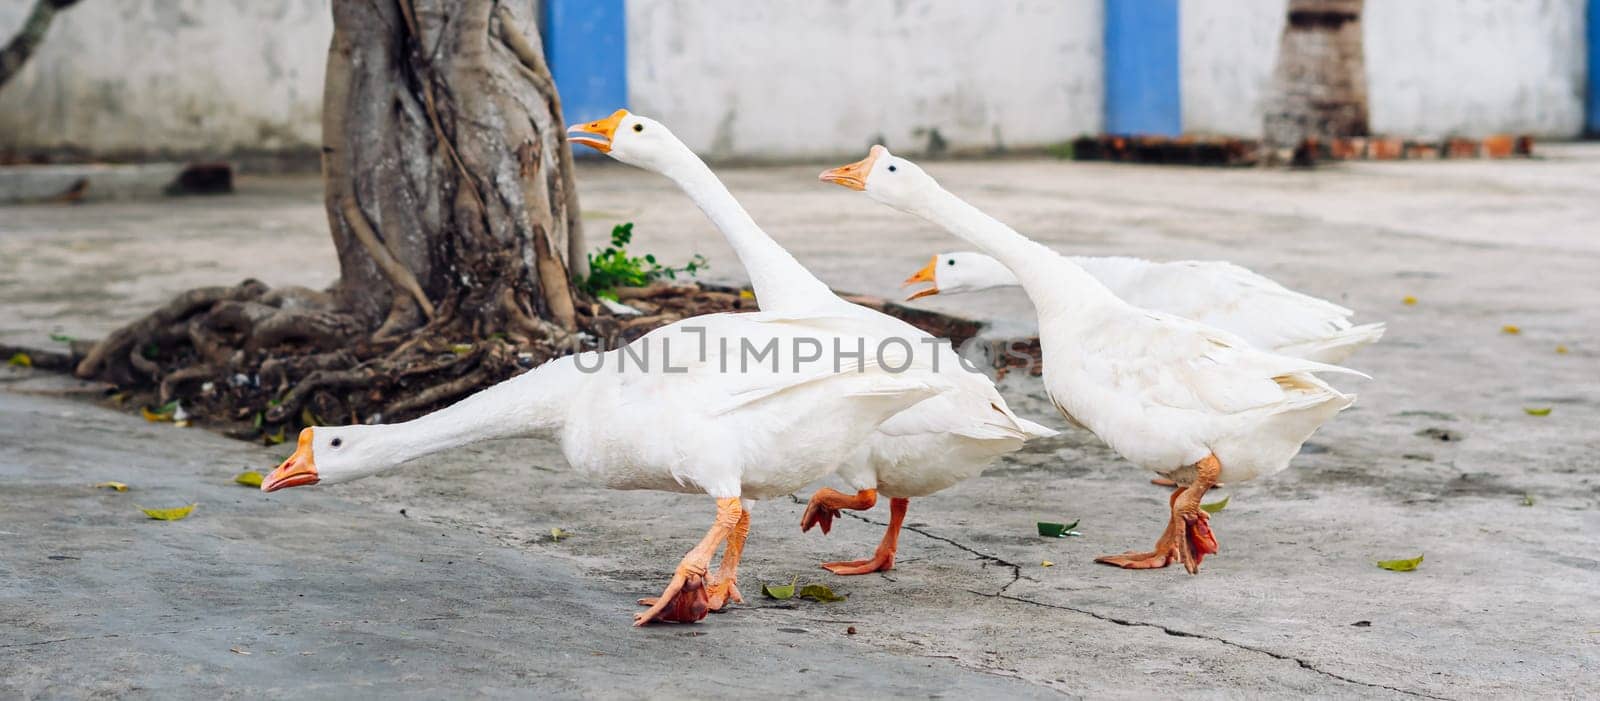 Several white geese walking together in small city. Craned necks. Summer mood, live close to domestic farm animals. Funny group of friends.